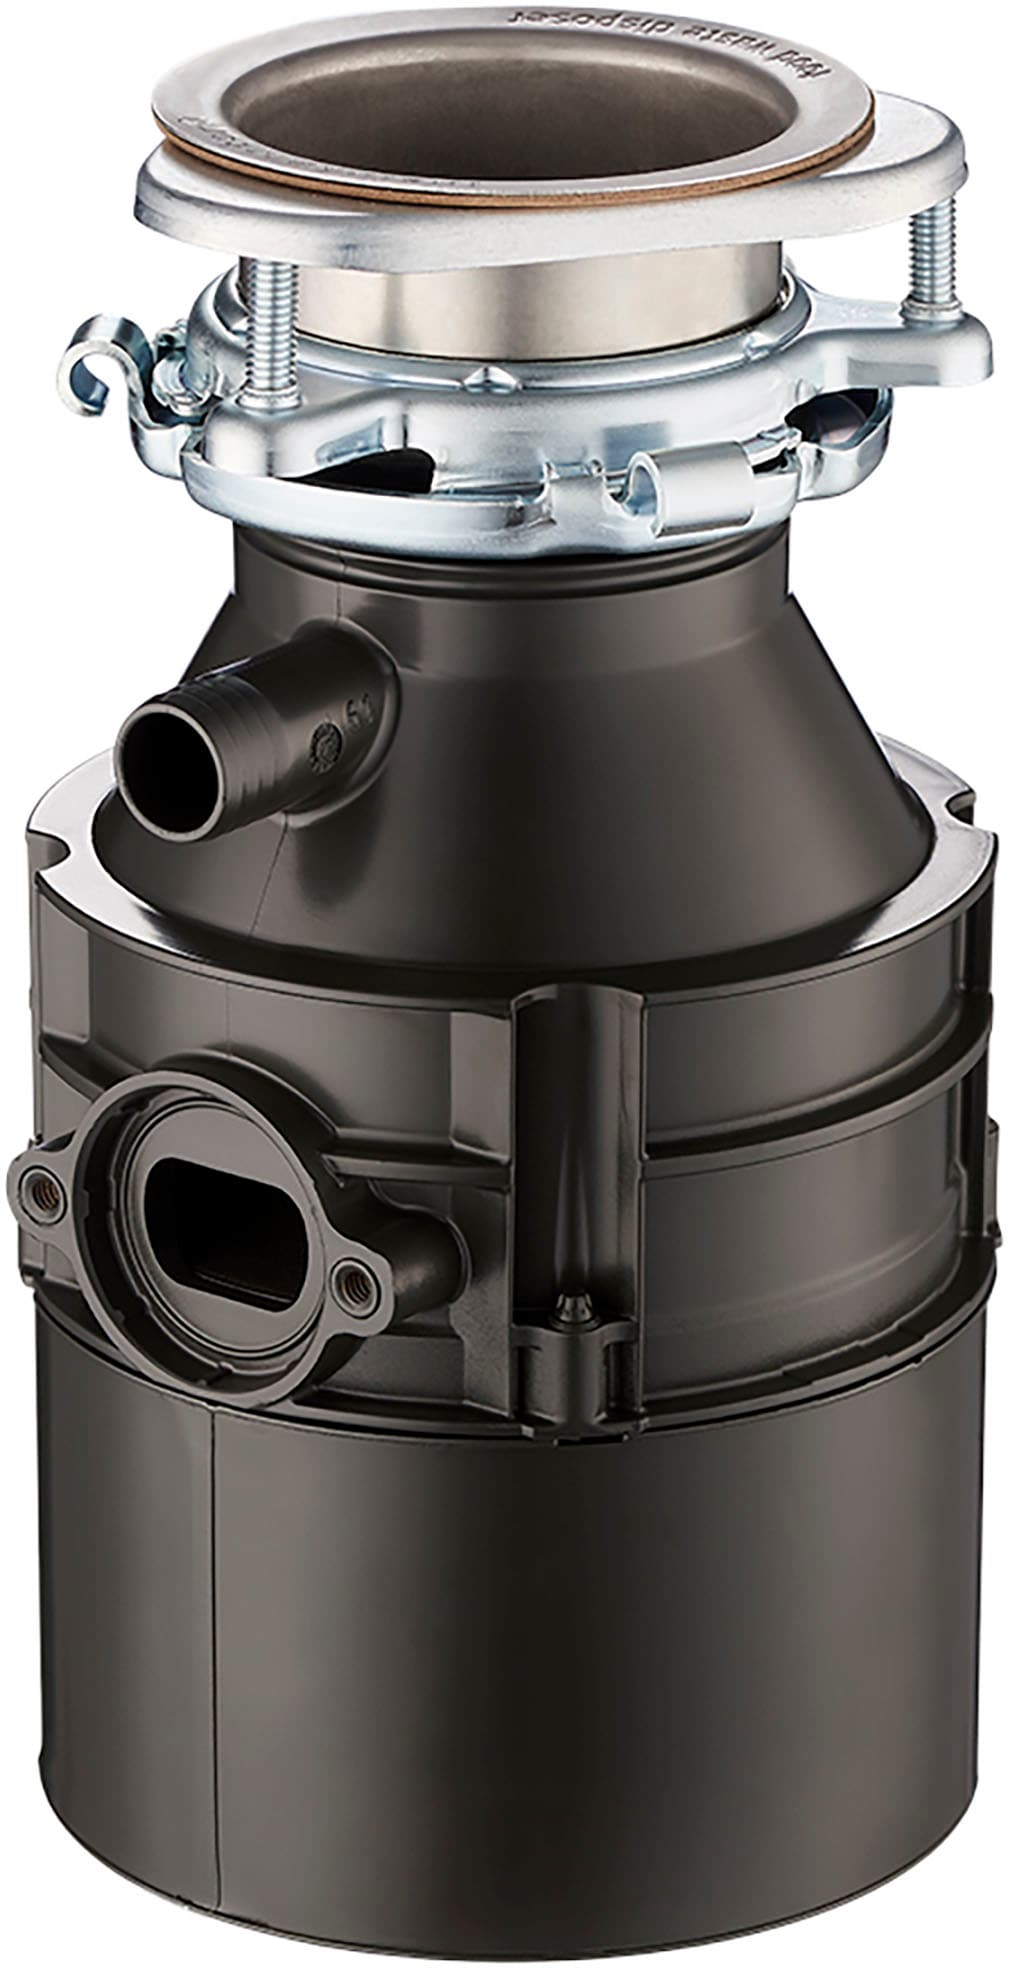 InSinkerator - Badger 5 Standard Series 1/2 HP Continuous Feed Garbage Disposal with Power Cord - Grey_7